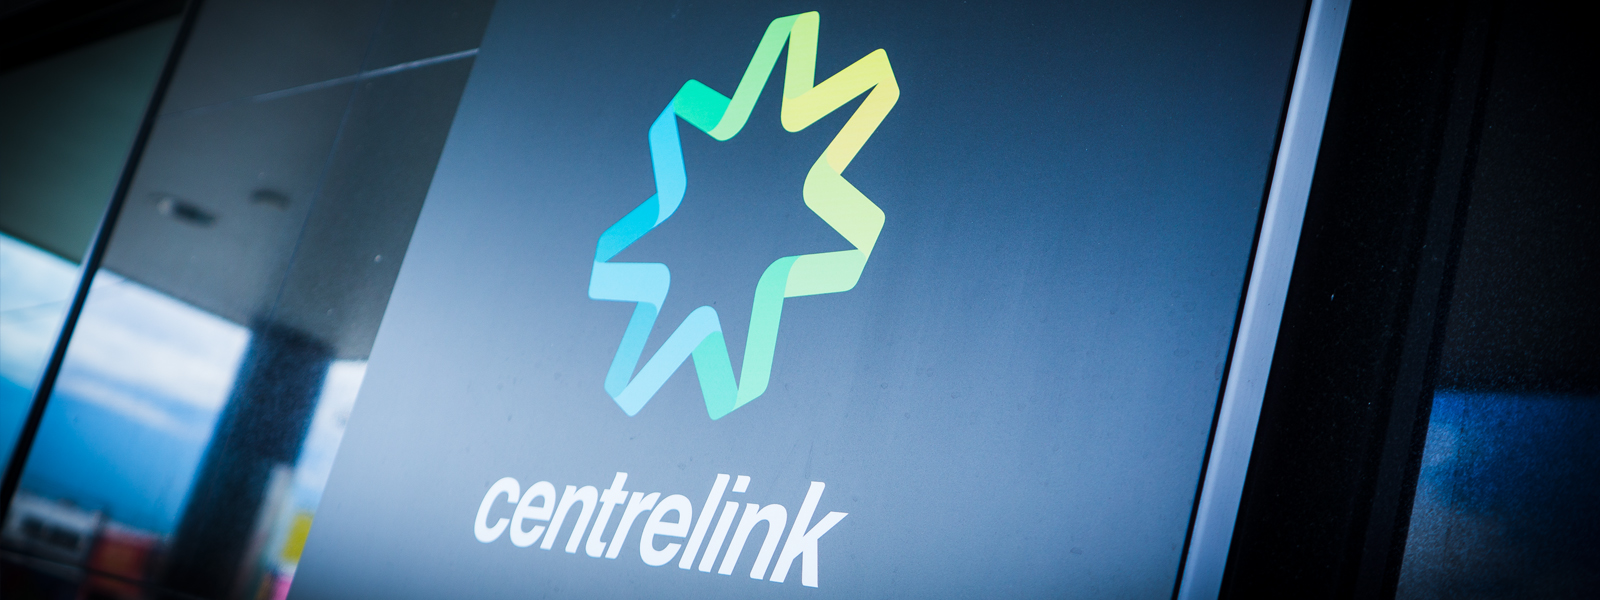 Home Loan on Centrelink Benefits